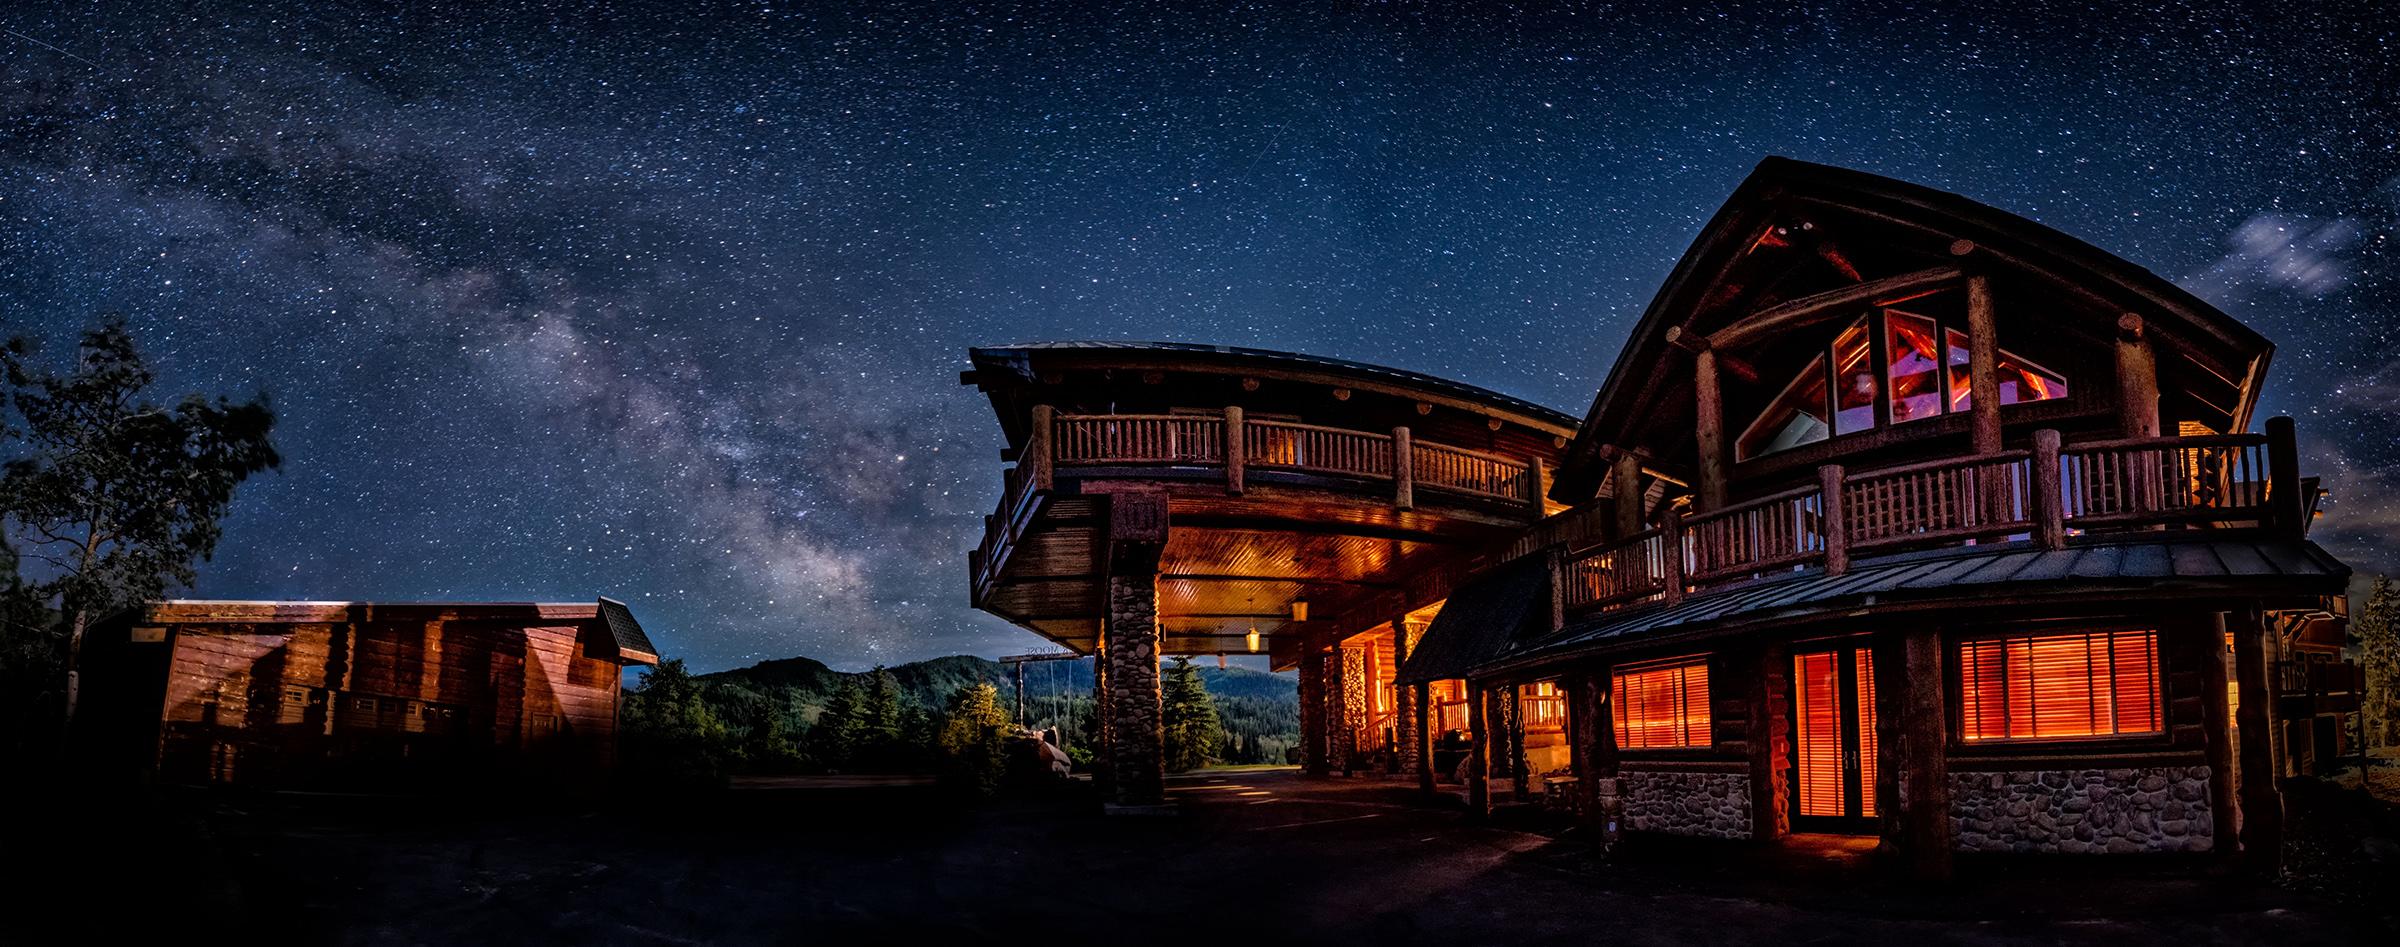 Stay at the largest mountain lodge in the U.S.